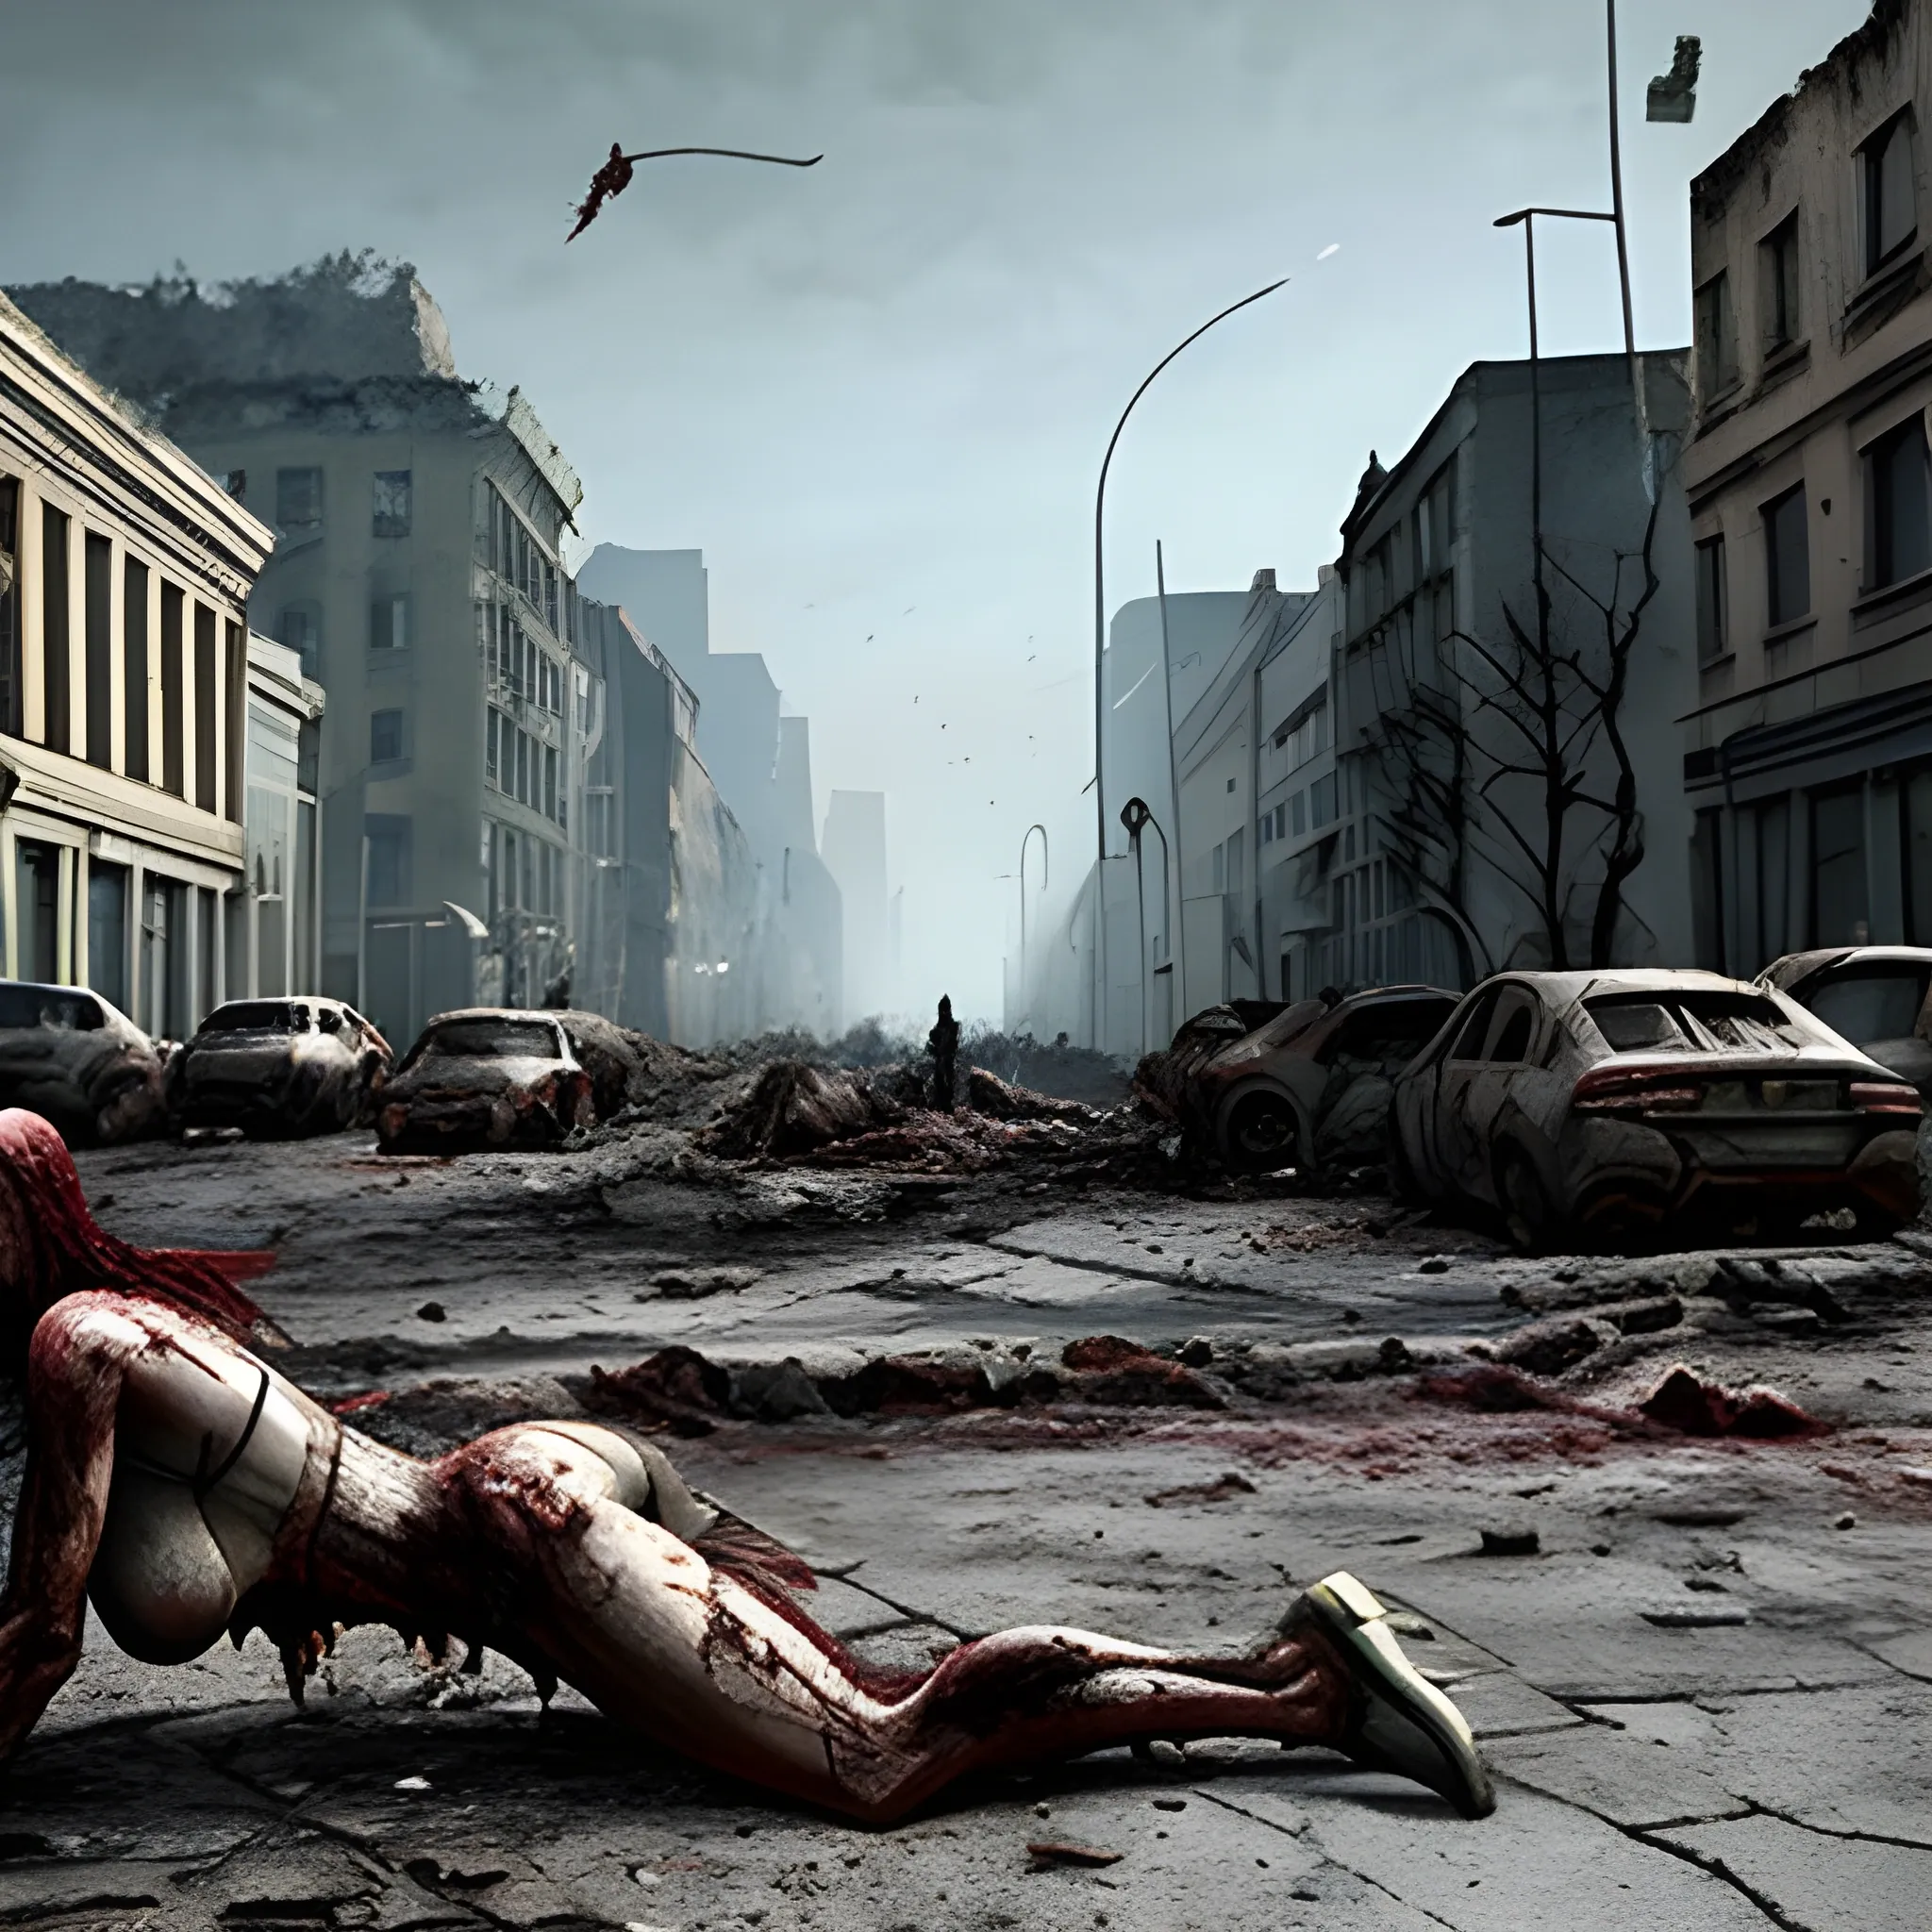 A street in a ruined city, zombies wandering aimlessly, a young woman's body lying on the ground with wounds sustained from zombie bites